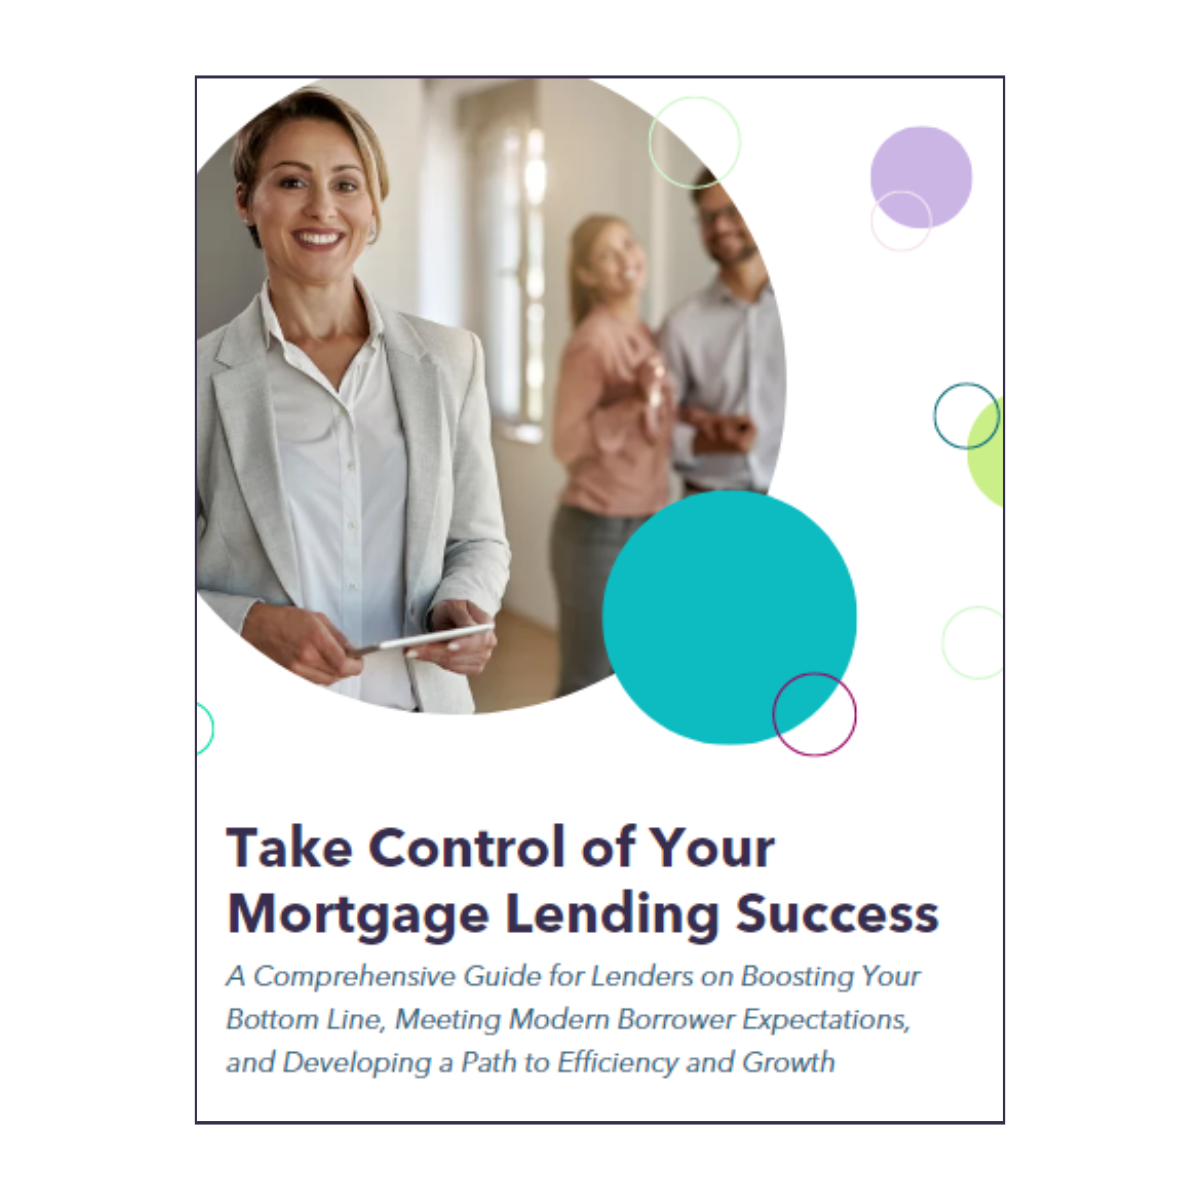 Take Control of Your Mortgage Lending Success